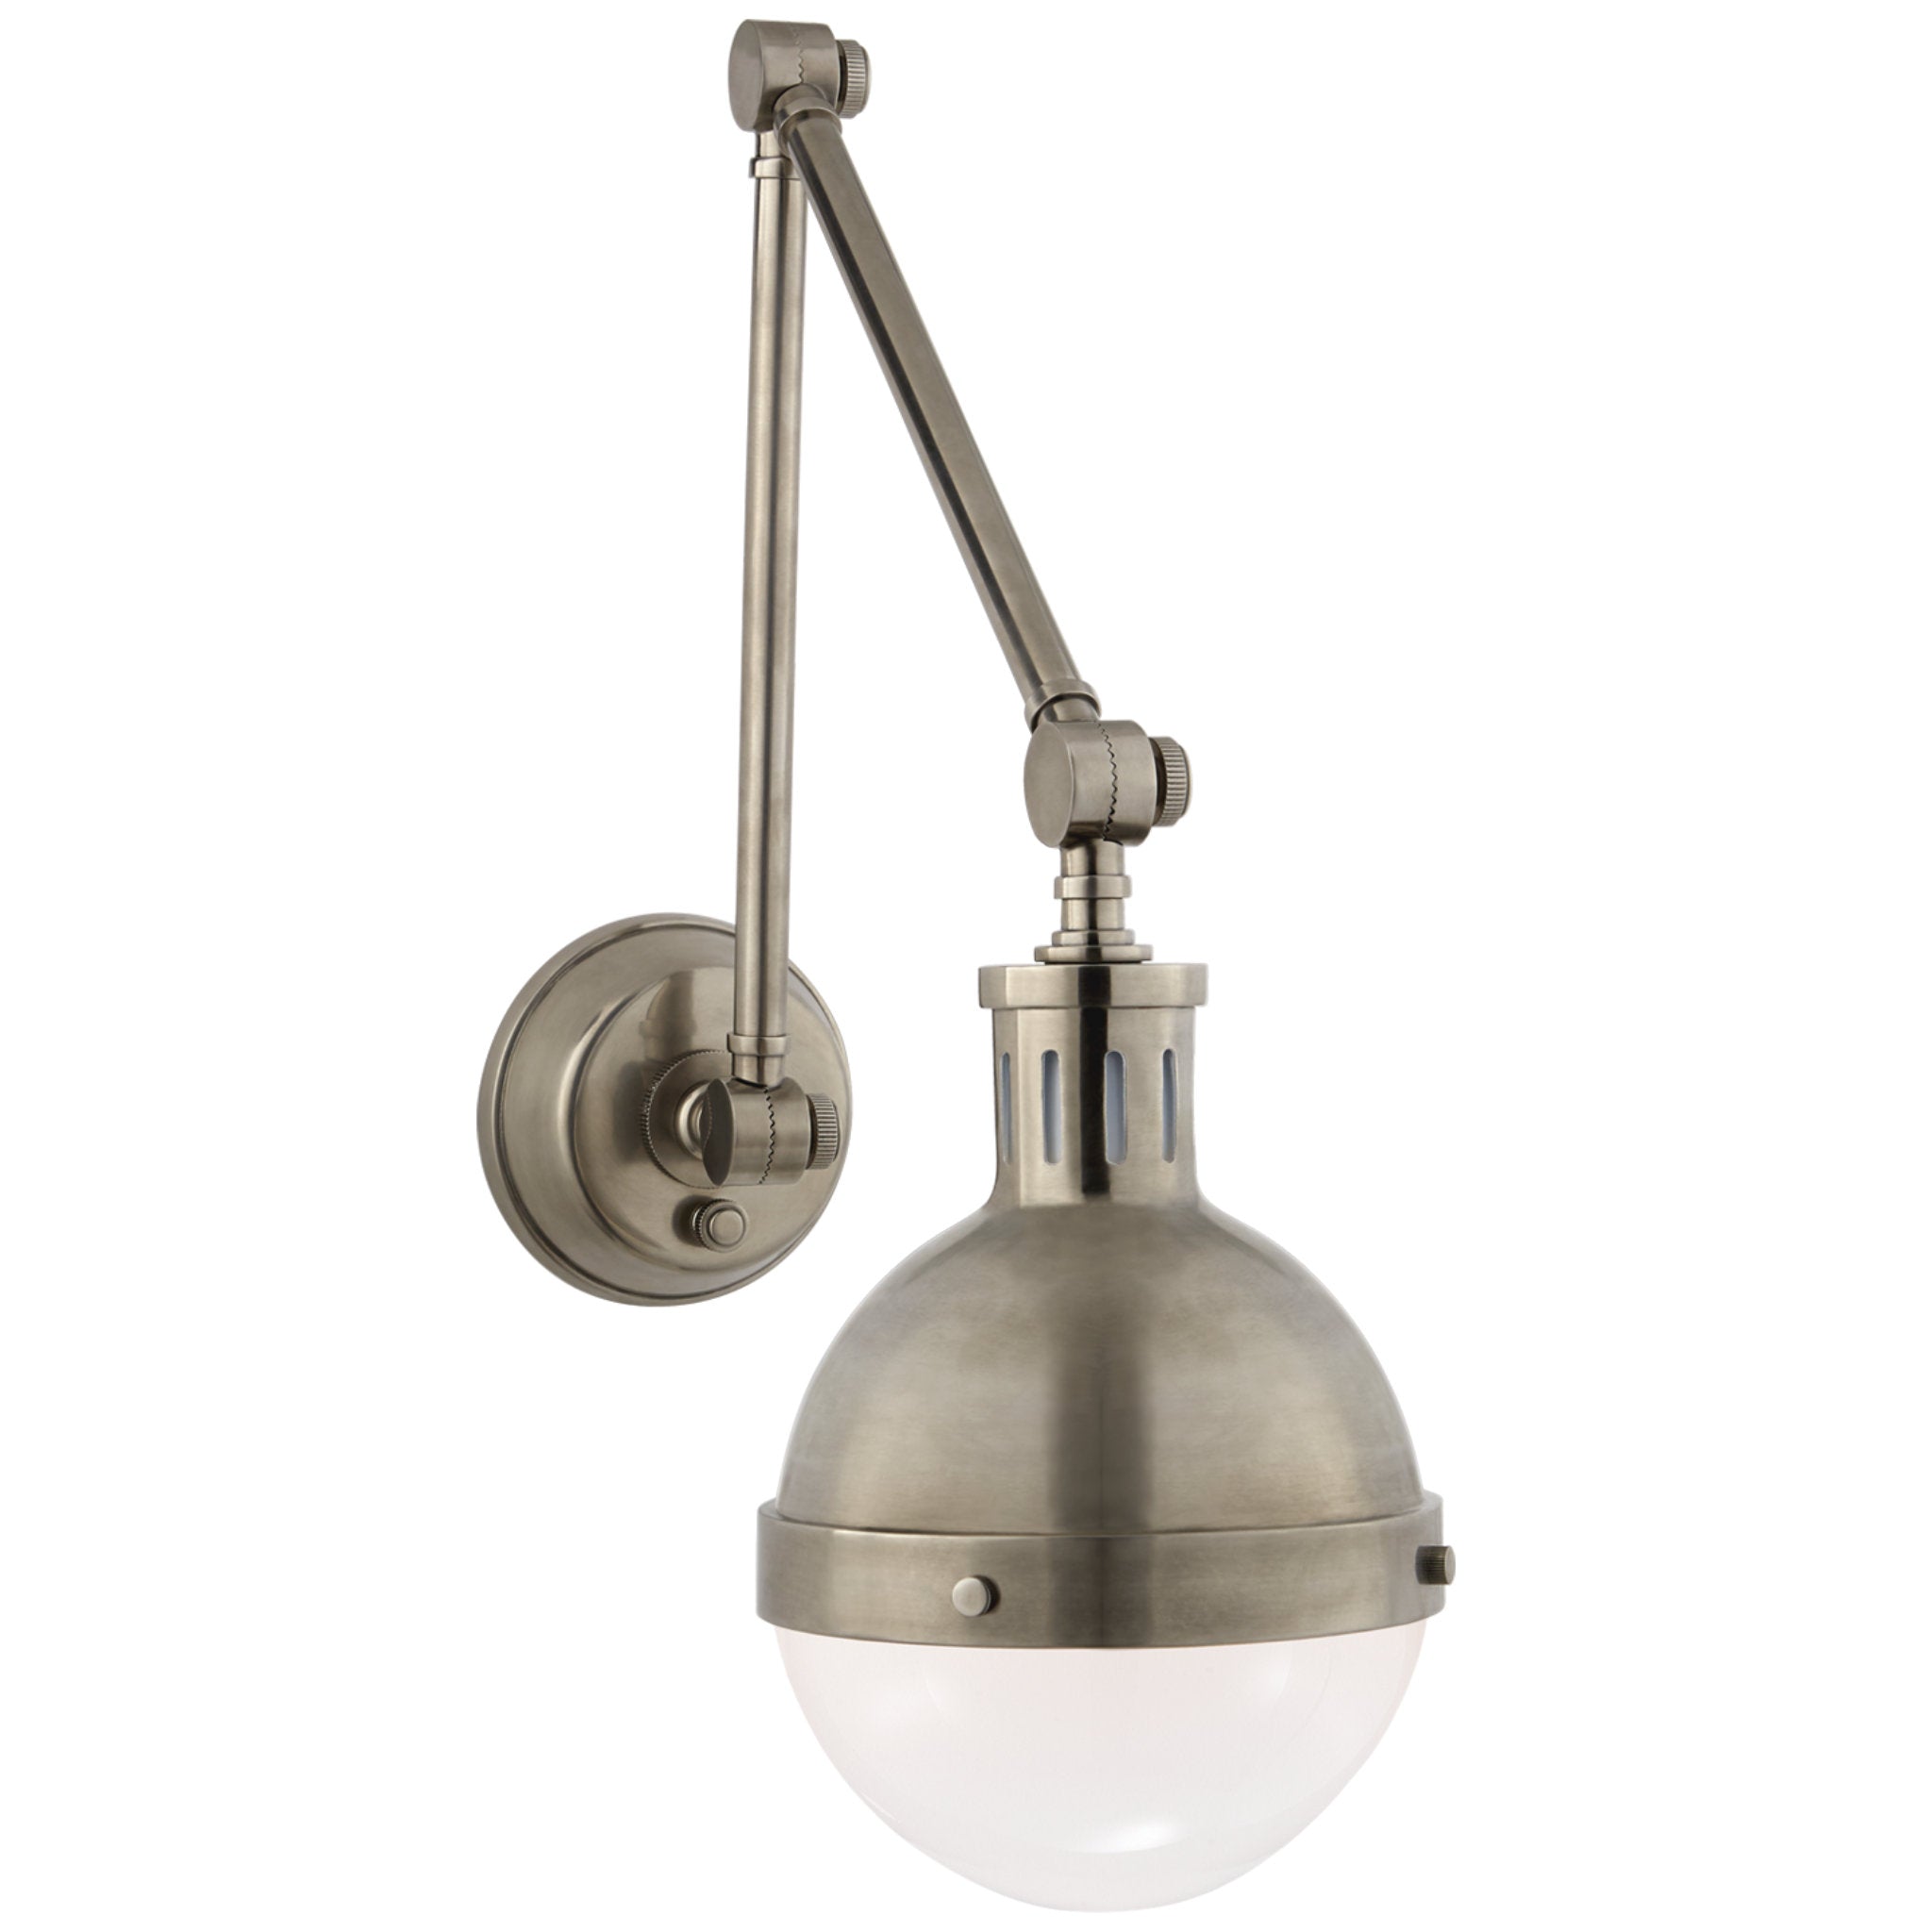 Thomas O'Brien Hicks Library Light in Antique Nickel with White Glass